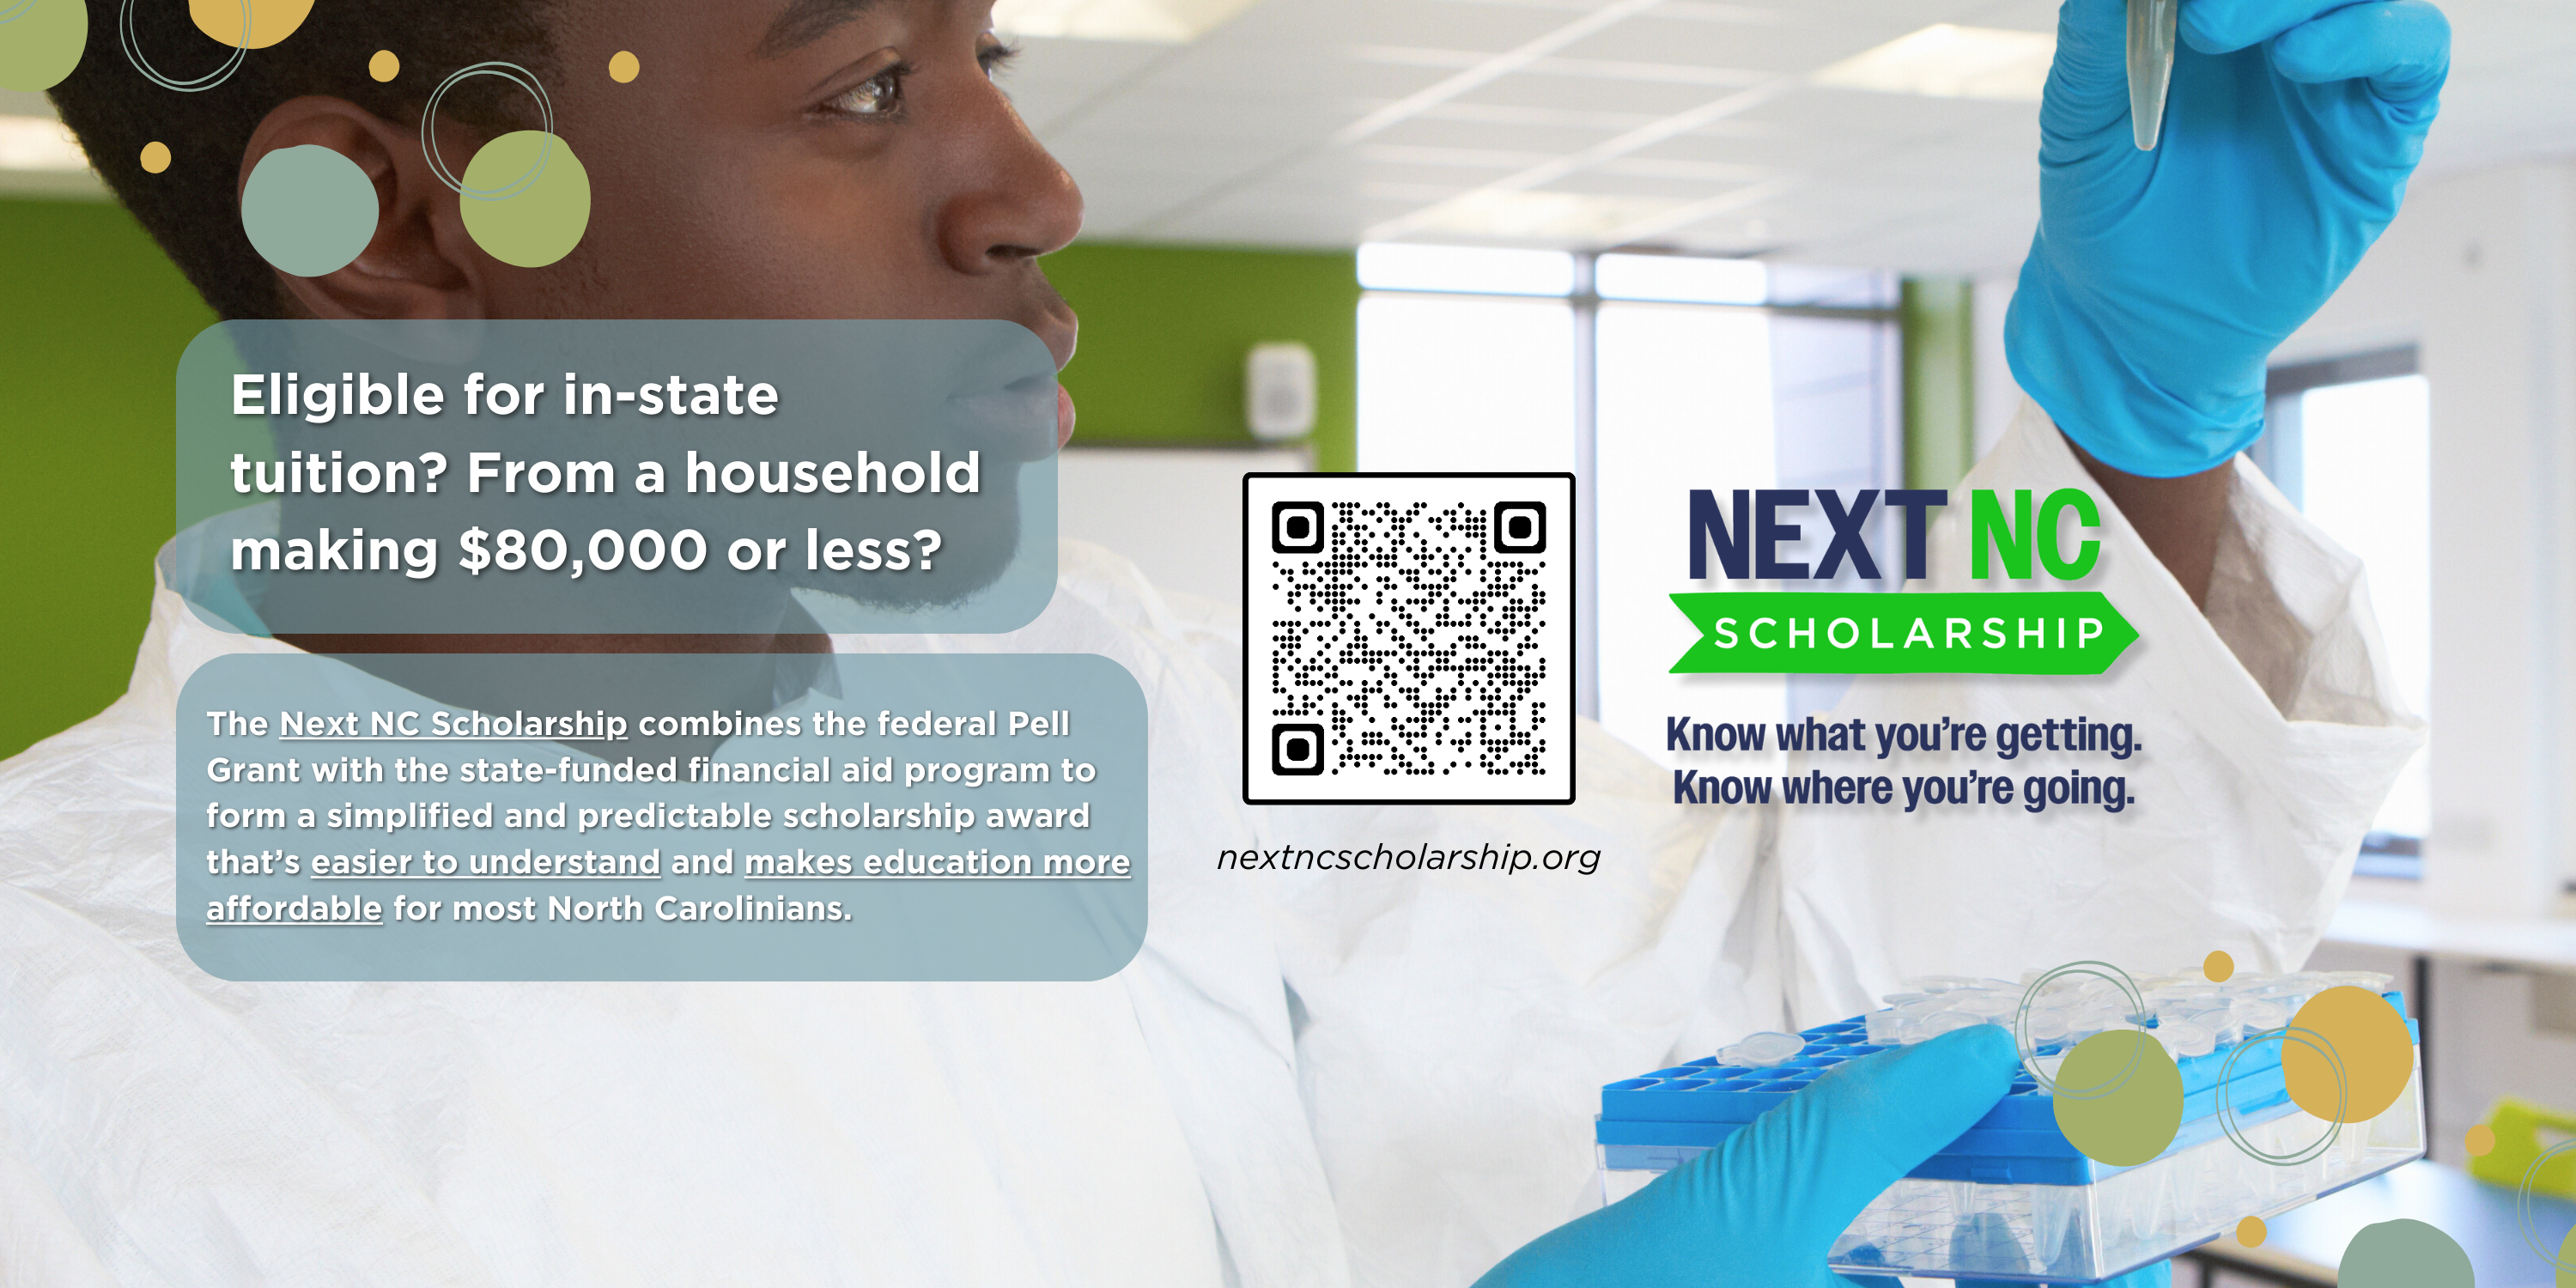 Banner that reads "Eligible for in-state tuition? From a household making $80,000 or less? | The Next NC Scholarship combines the federal Pell Grant with the state-funded financial aid program to form a simplified and predictable scholarship award that's easier to understand and makes education more affordable for most North Carolinians.". Scan the QR code in the middle of the banner or click the banner for more info.